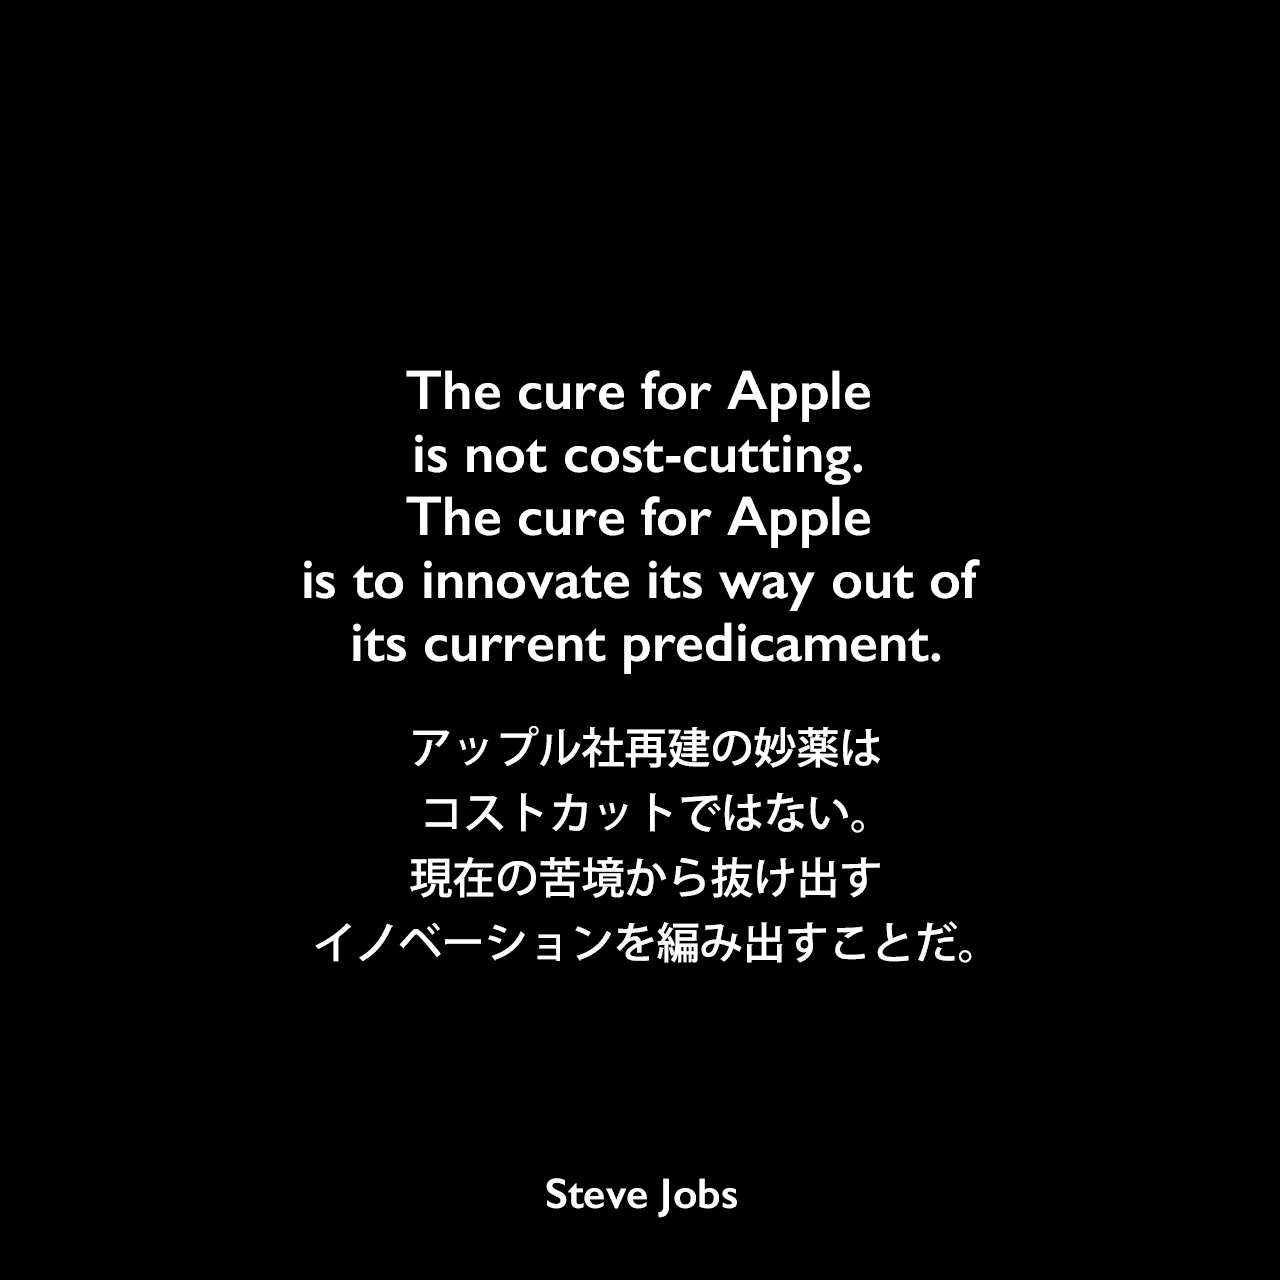 The cure for Apple is not cost-cutting. The cure for Apple is to innovate its way out of its current predicament.アップル社再建の妙薬は、コストカットではない。現在の苦境から抜け出すイノベーションを編み出すことだ。- オーウェン・リンズマイヤーによる本「Apple Confidential 2.0」よりSteve Jobs